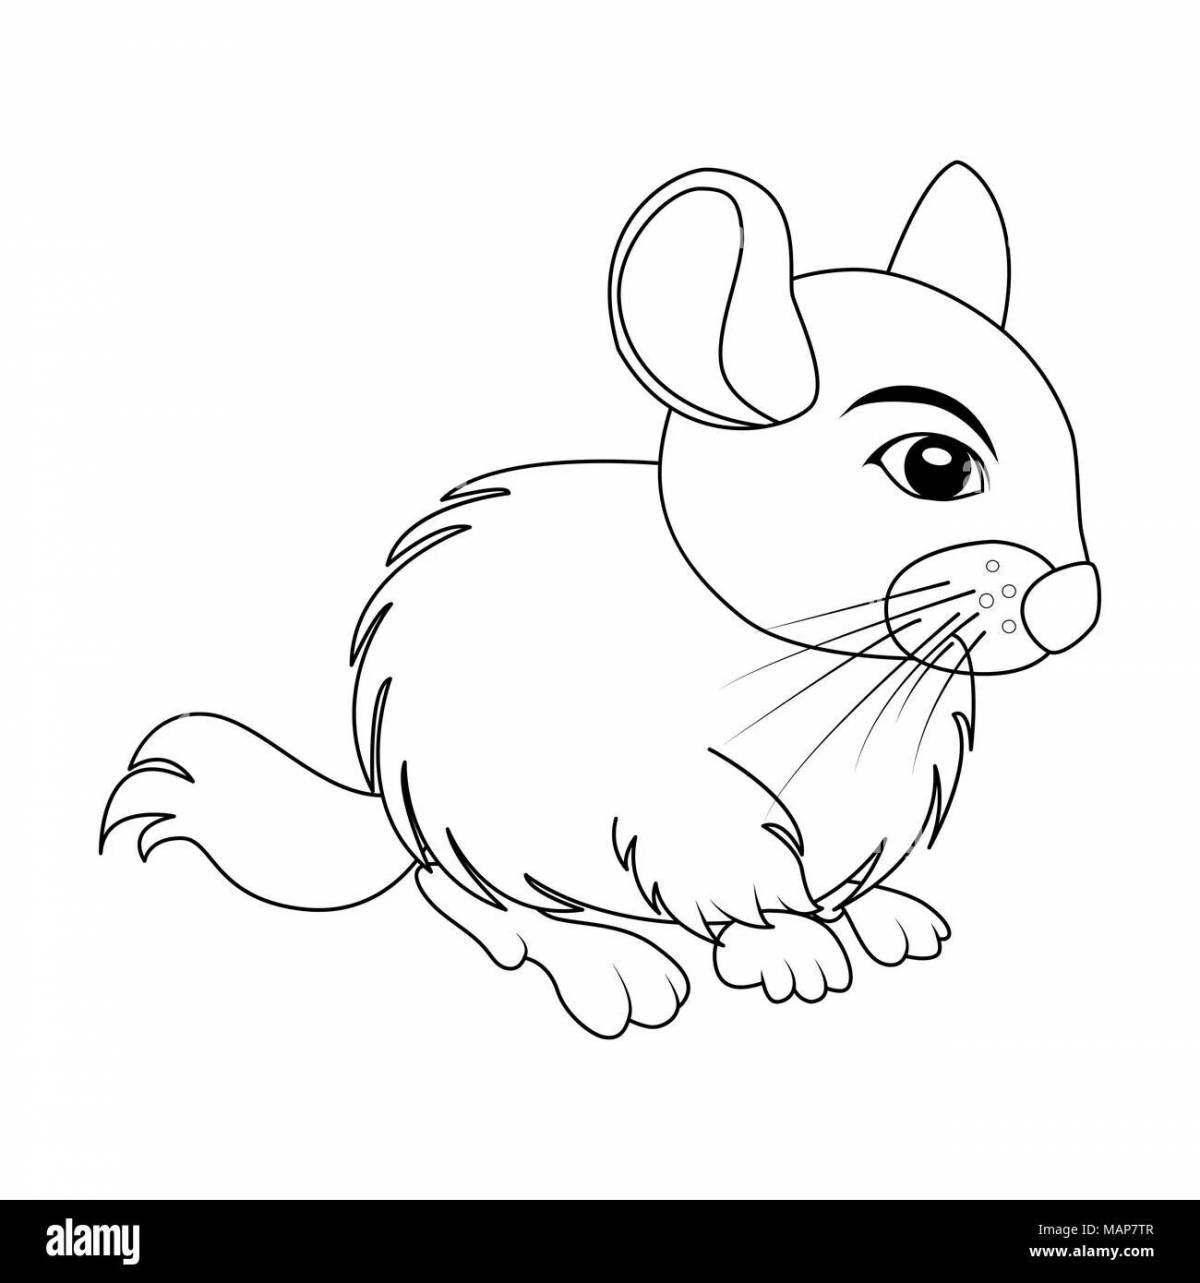 A fun chinchilla coloring book for babies